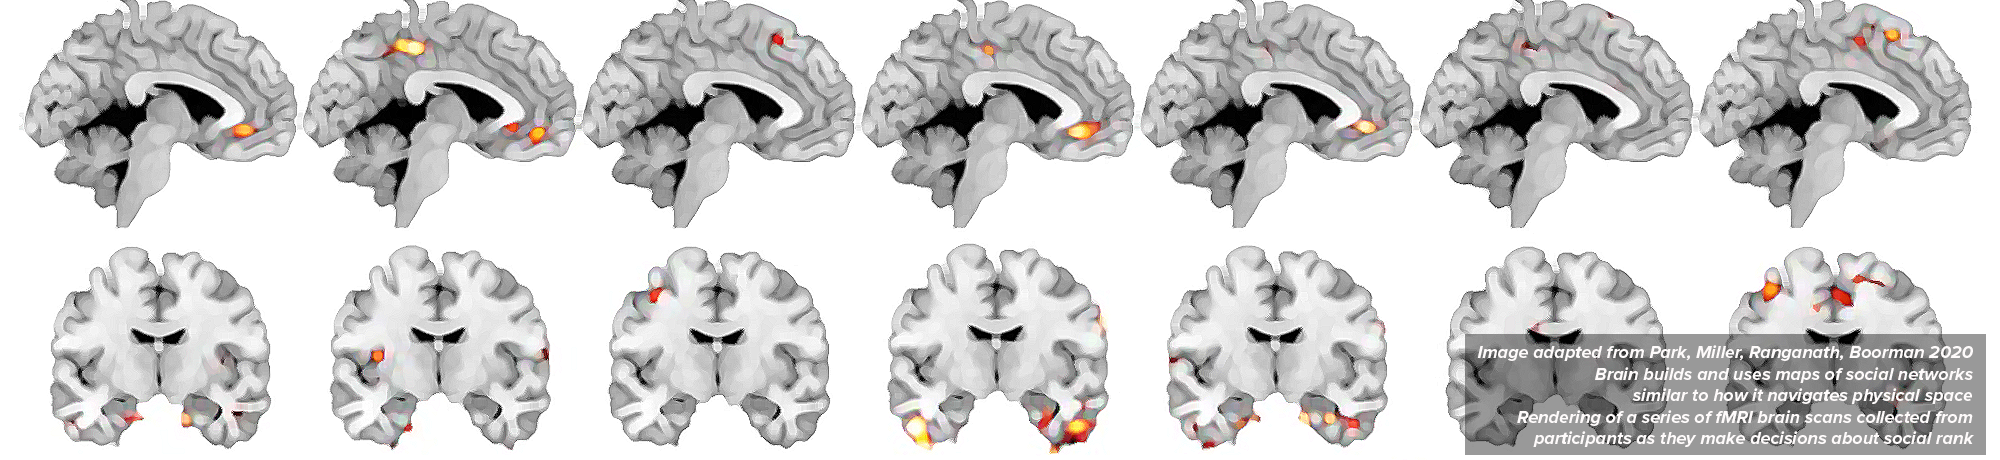 Series of fMRI brain scans from participants as they make decisions about social rank